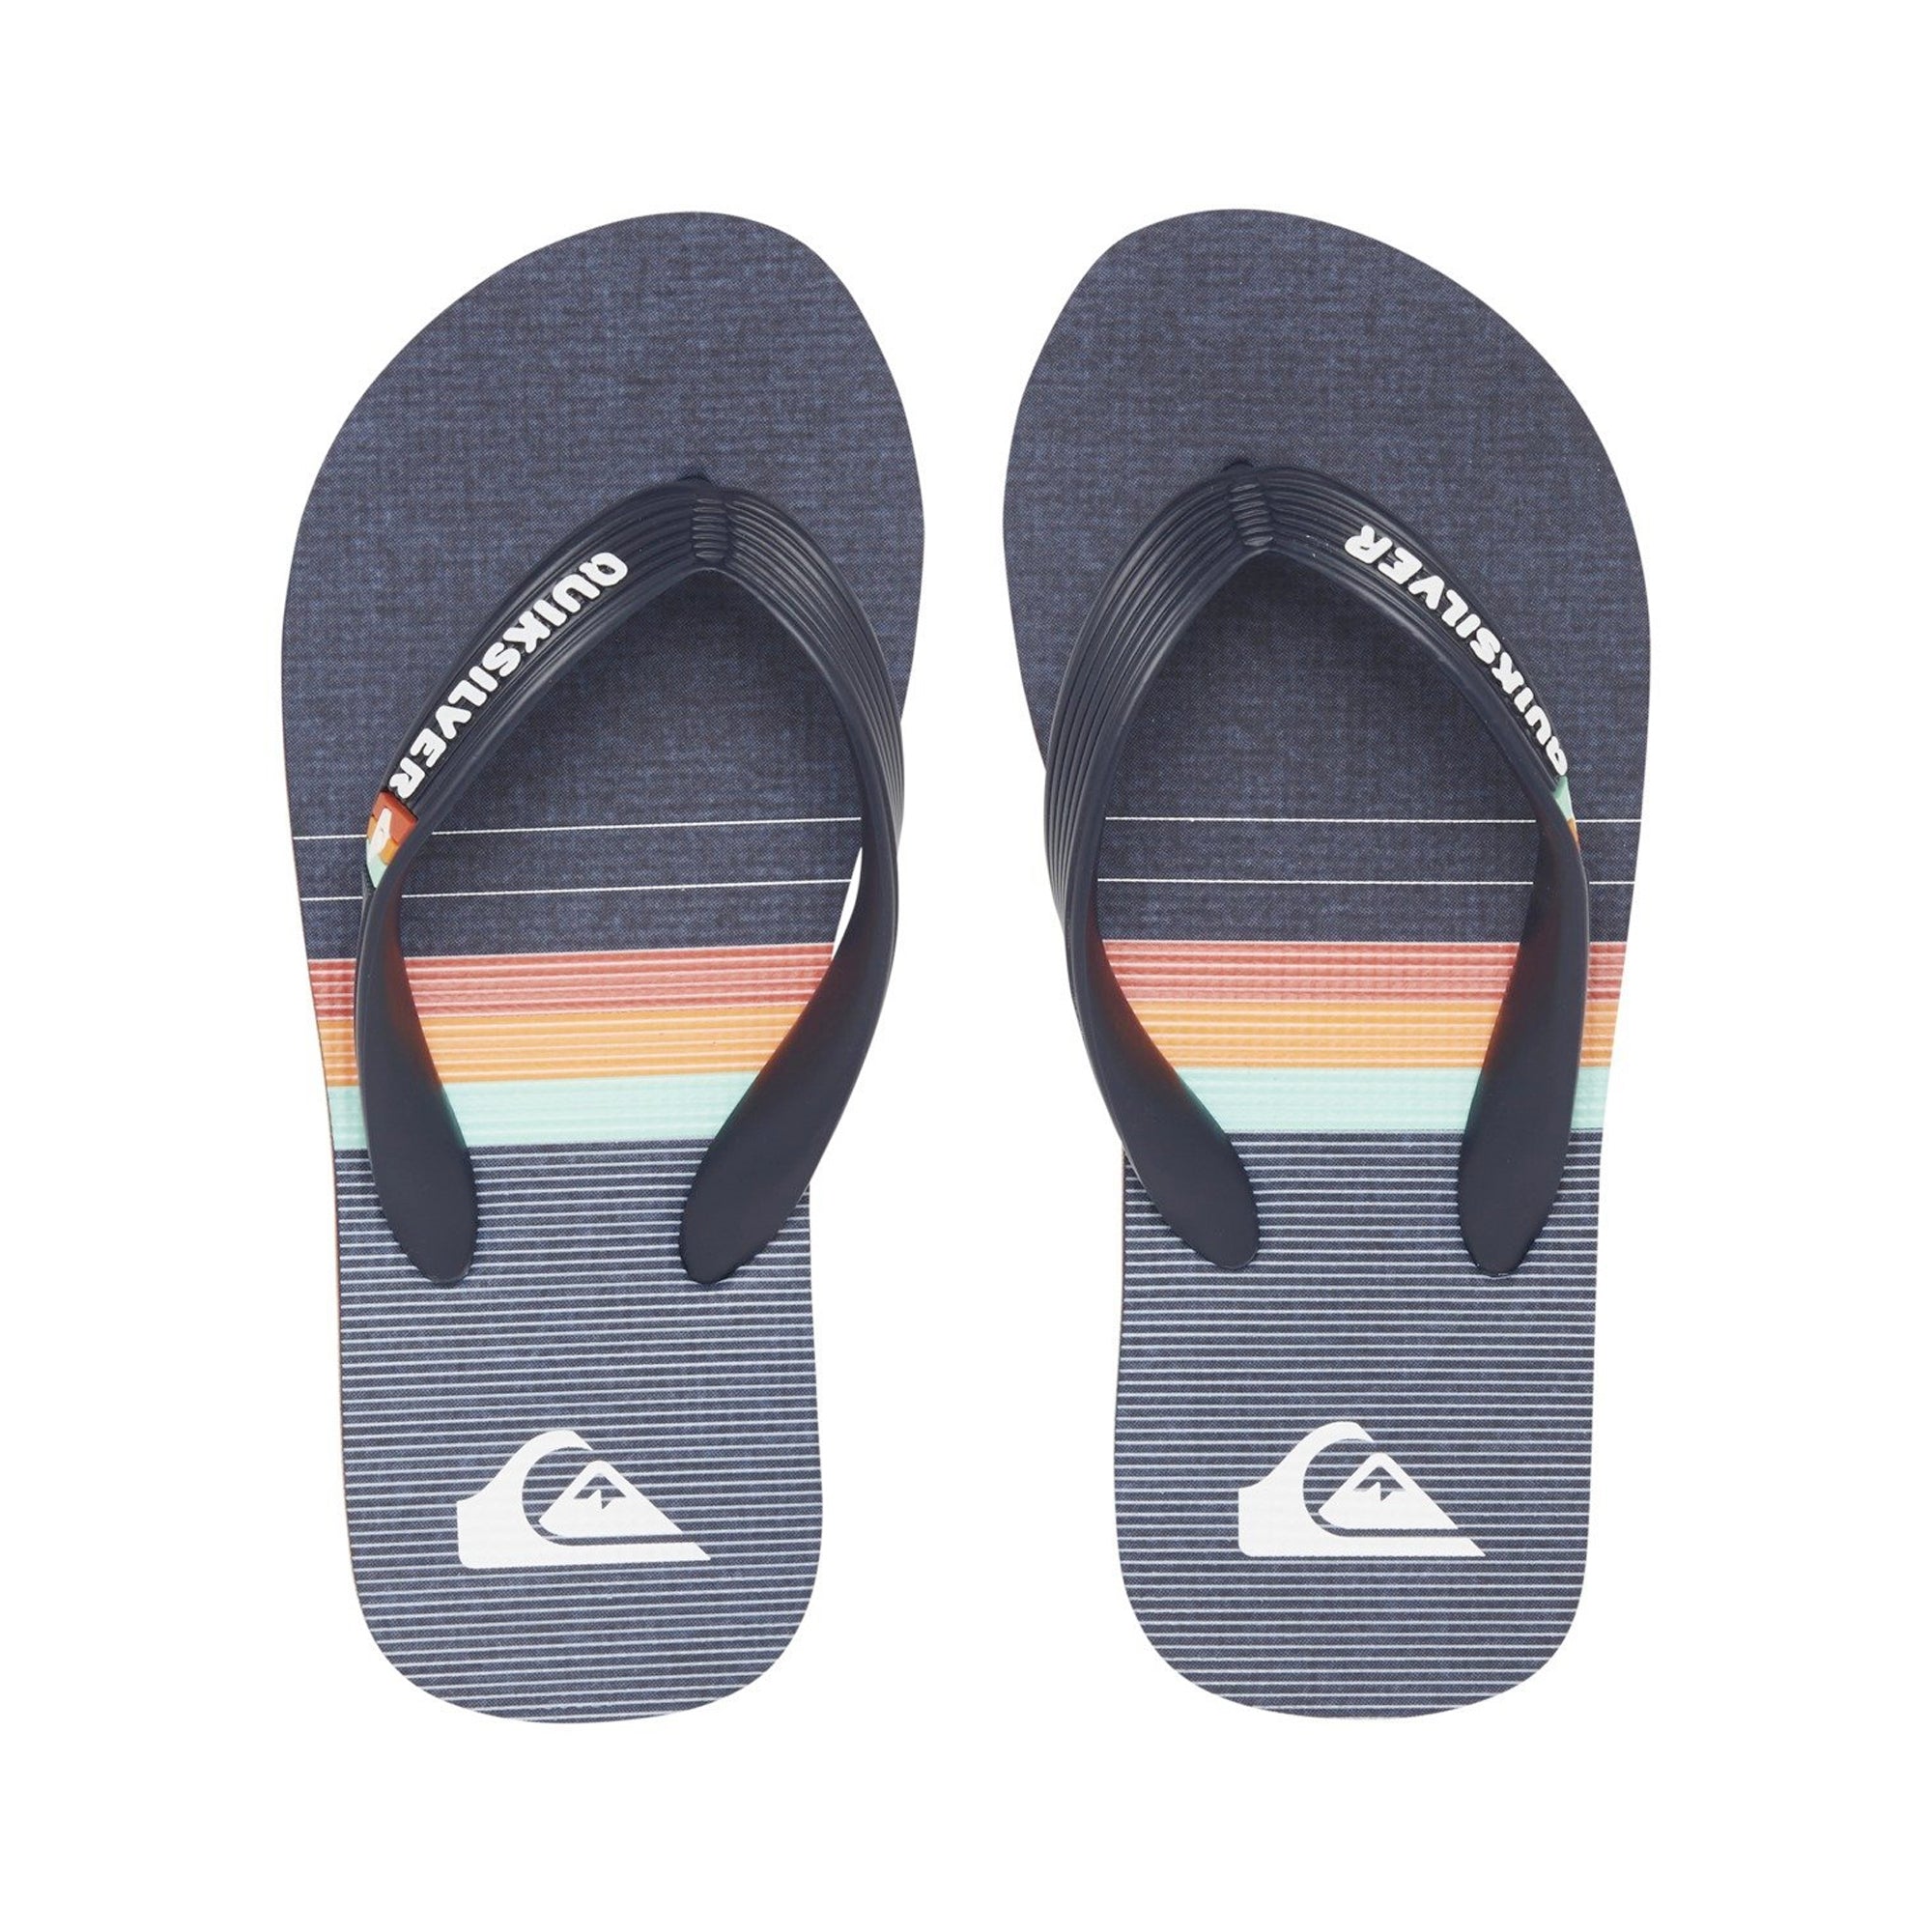 Quiksilver Molokai More Core Youth Sandals